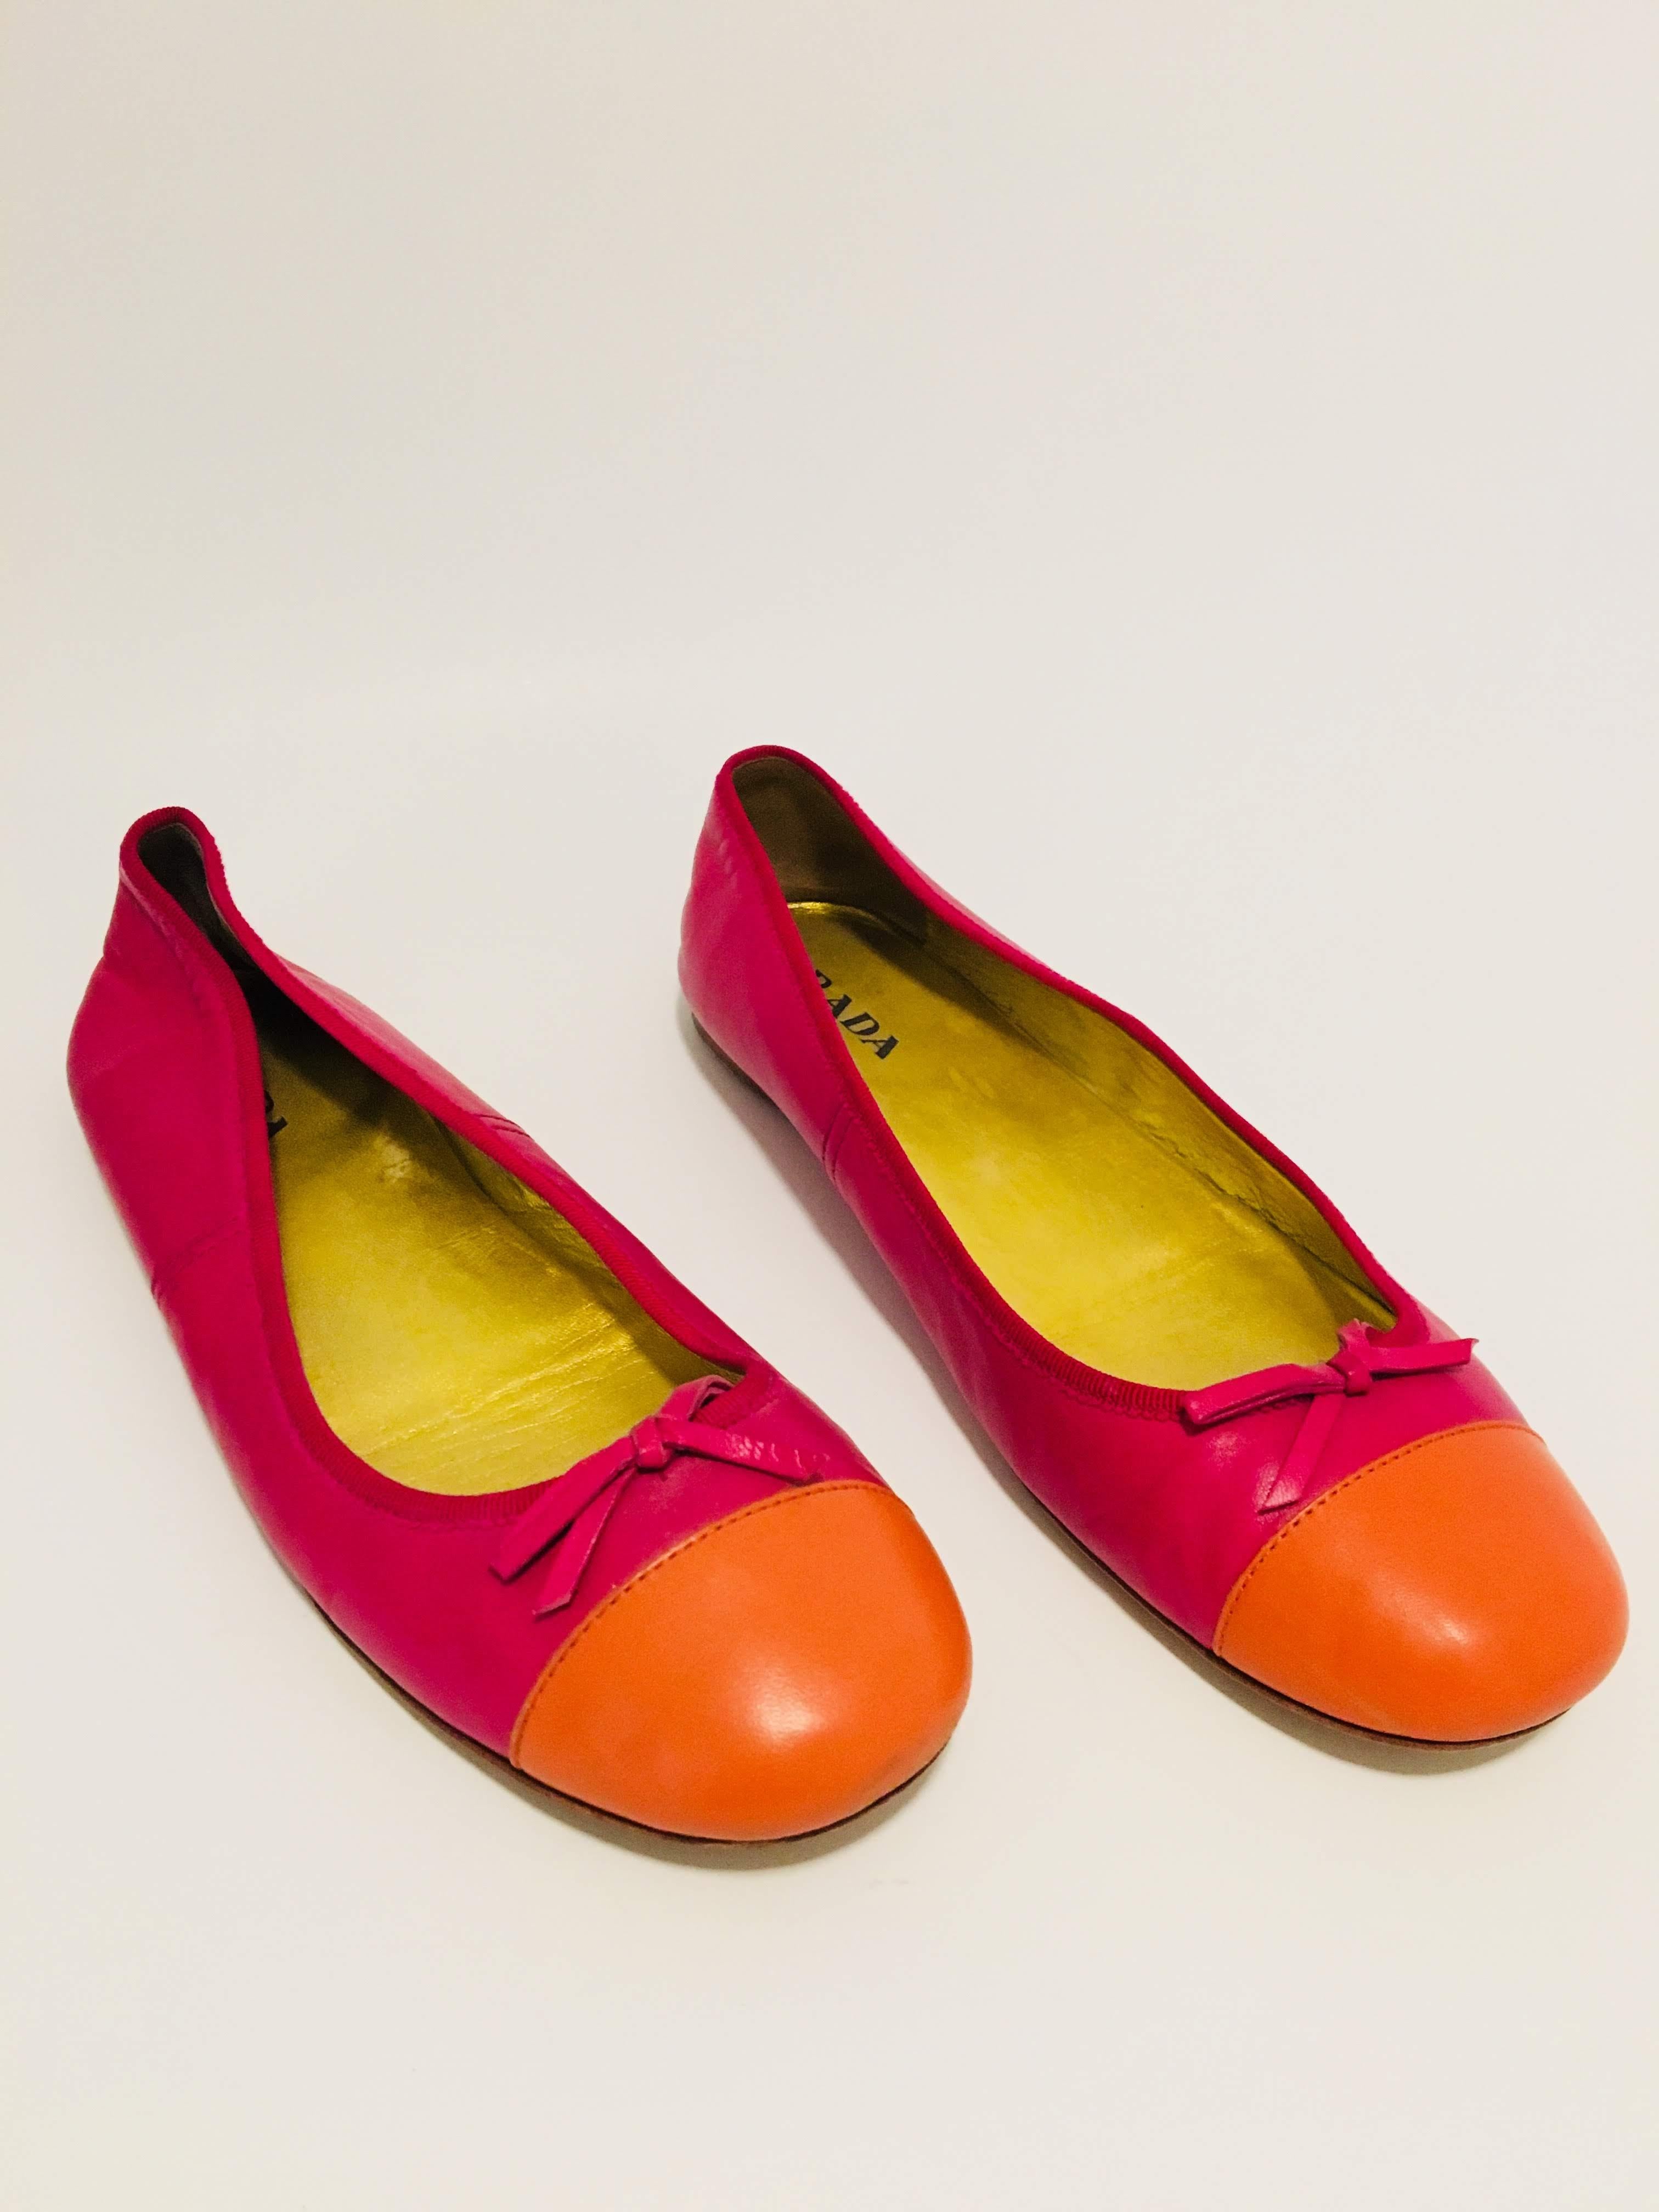 Orange and Pink Colorblock Flats in Leather, IT Size 38 with Bow Accent at Toe